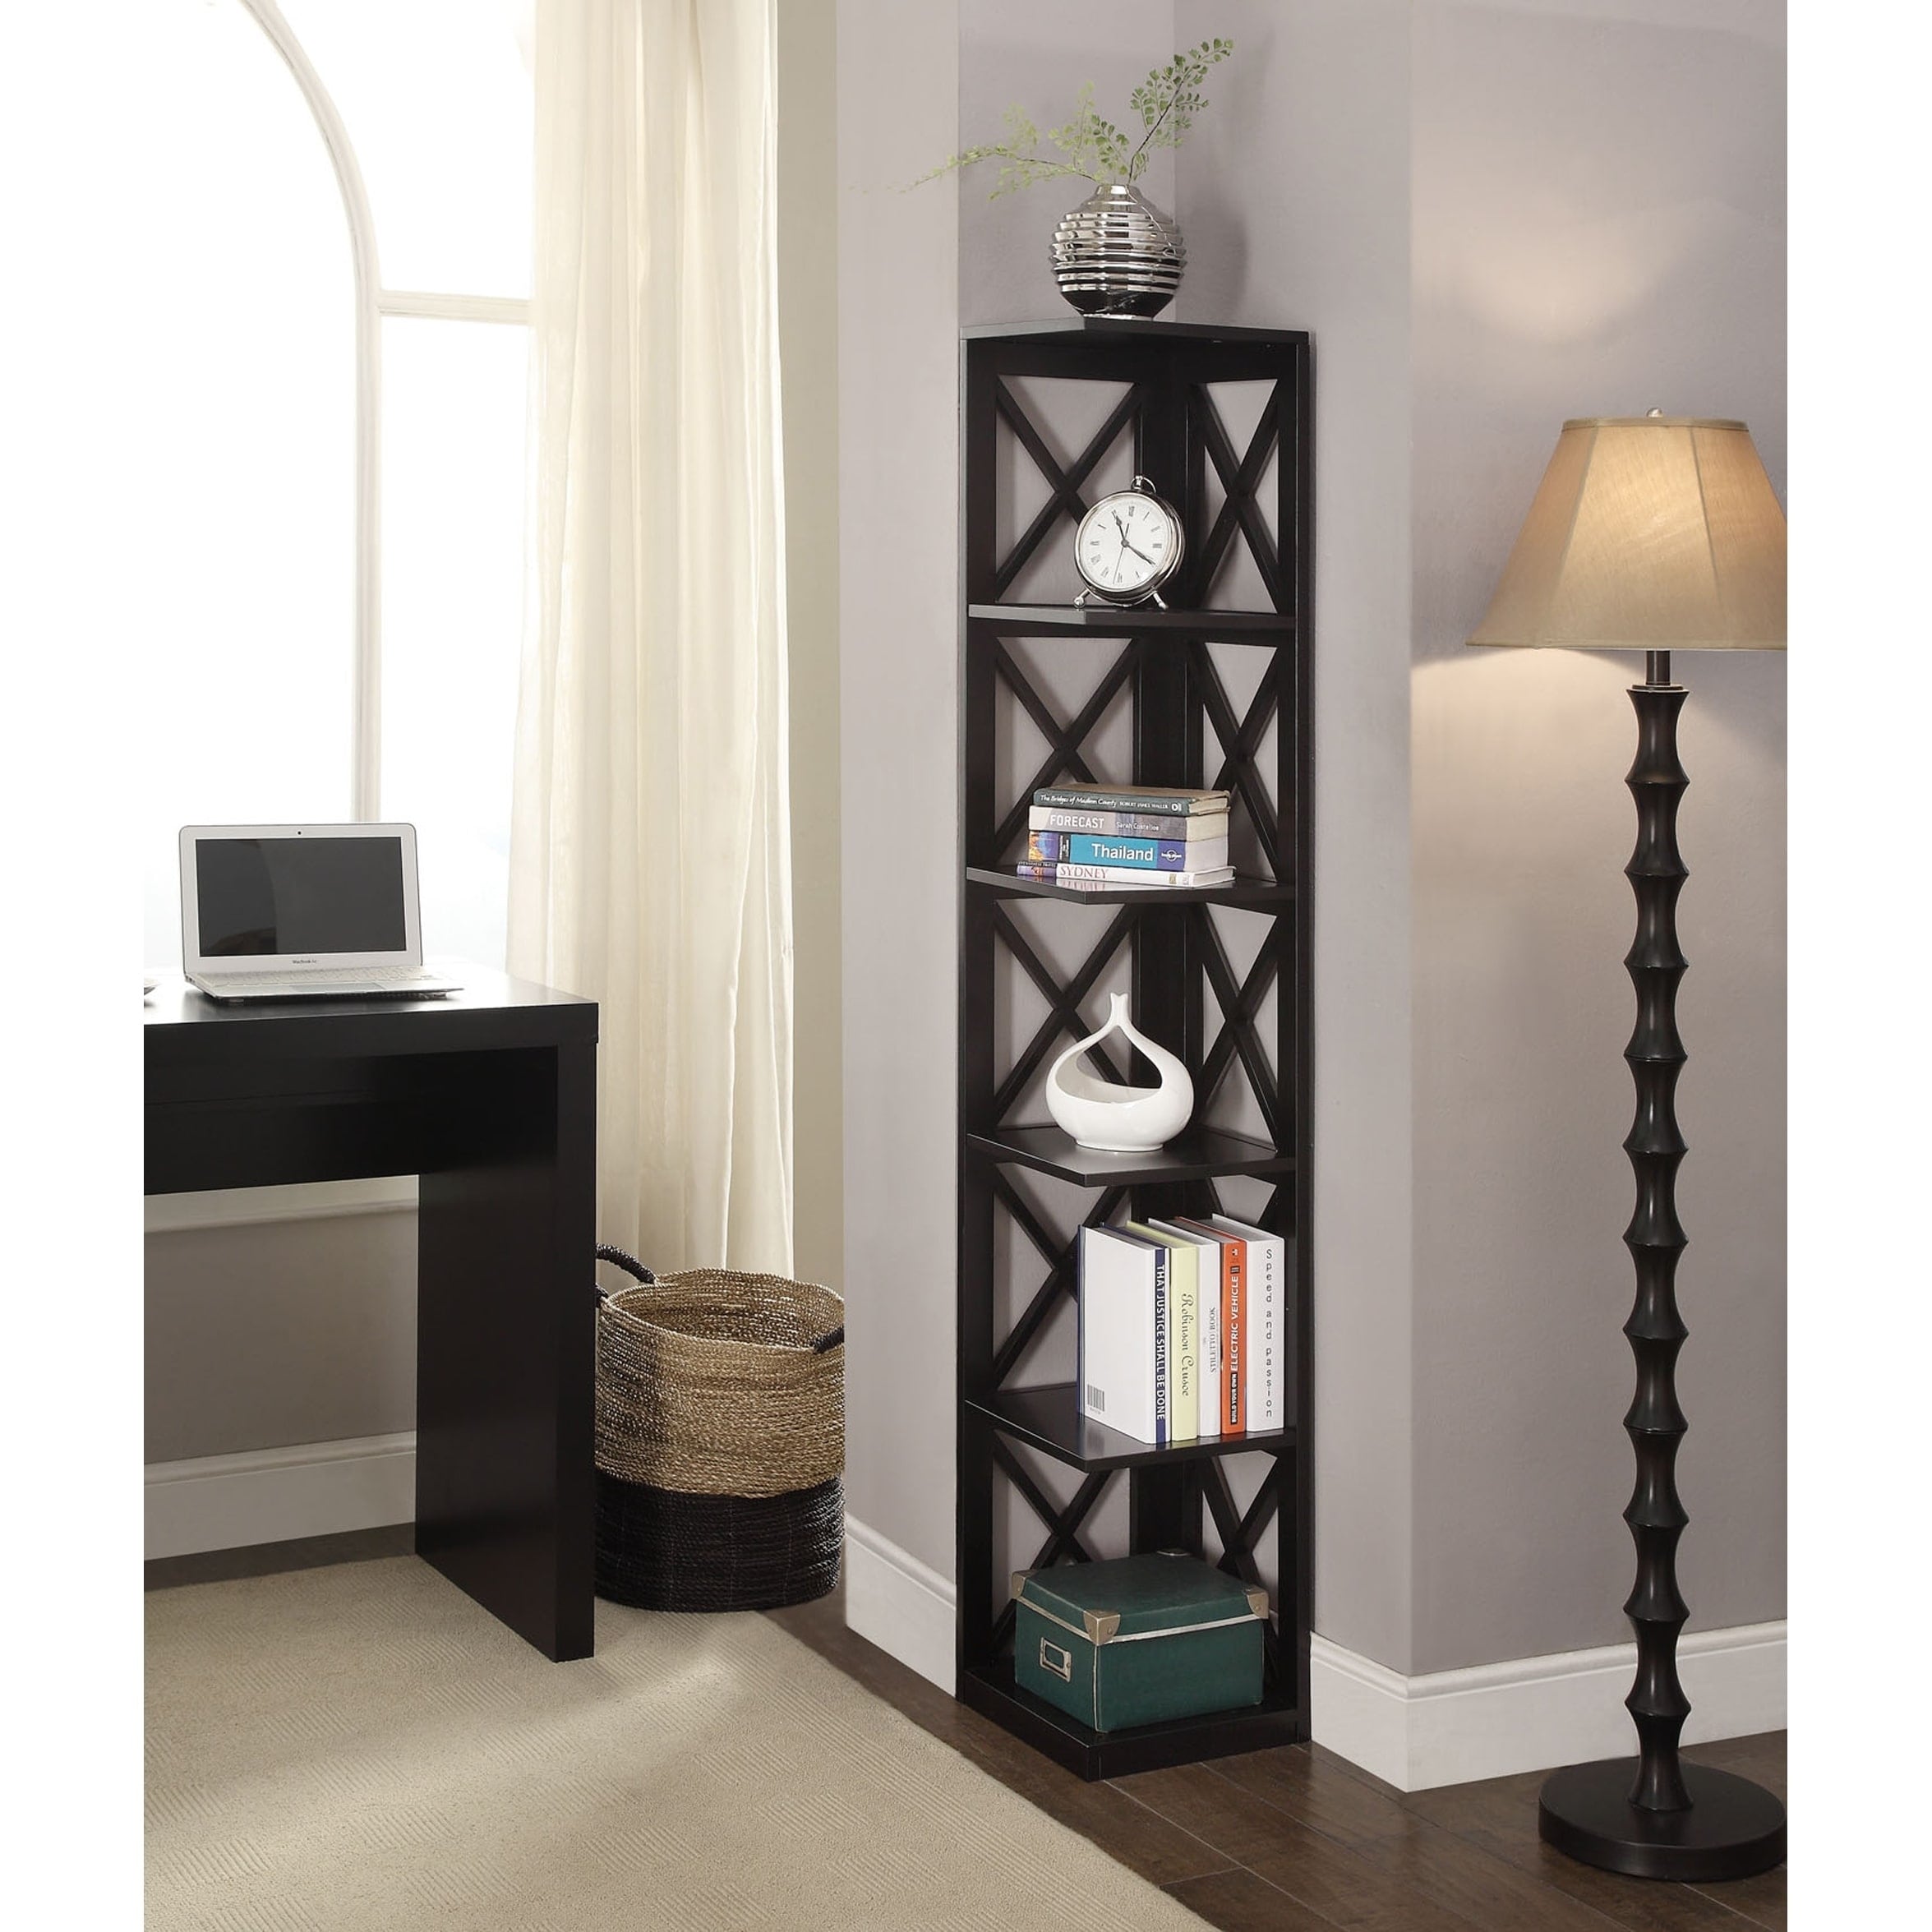 Creatice Wood Corner Bookcase for Large Space